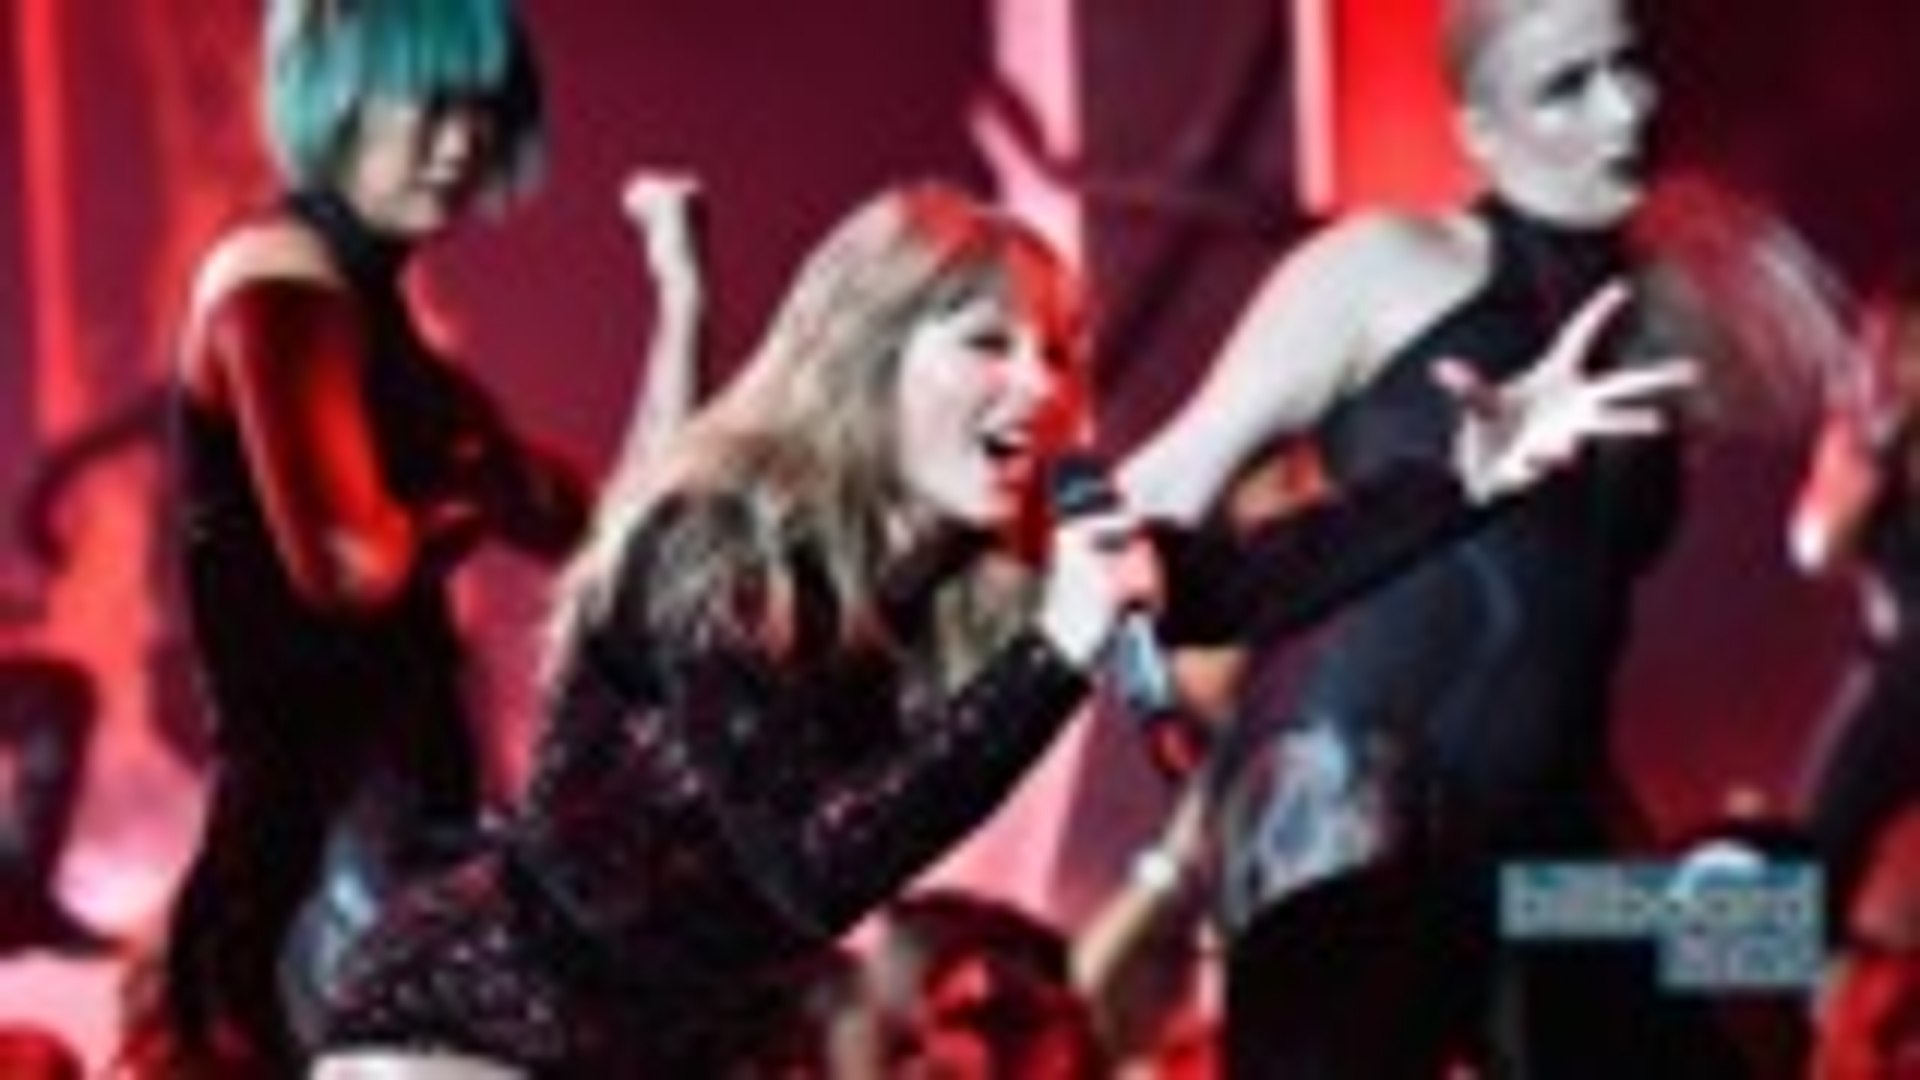 Taylor Swift Opens The 2018 Amas With I Did Something Bad Billboard News